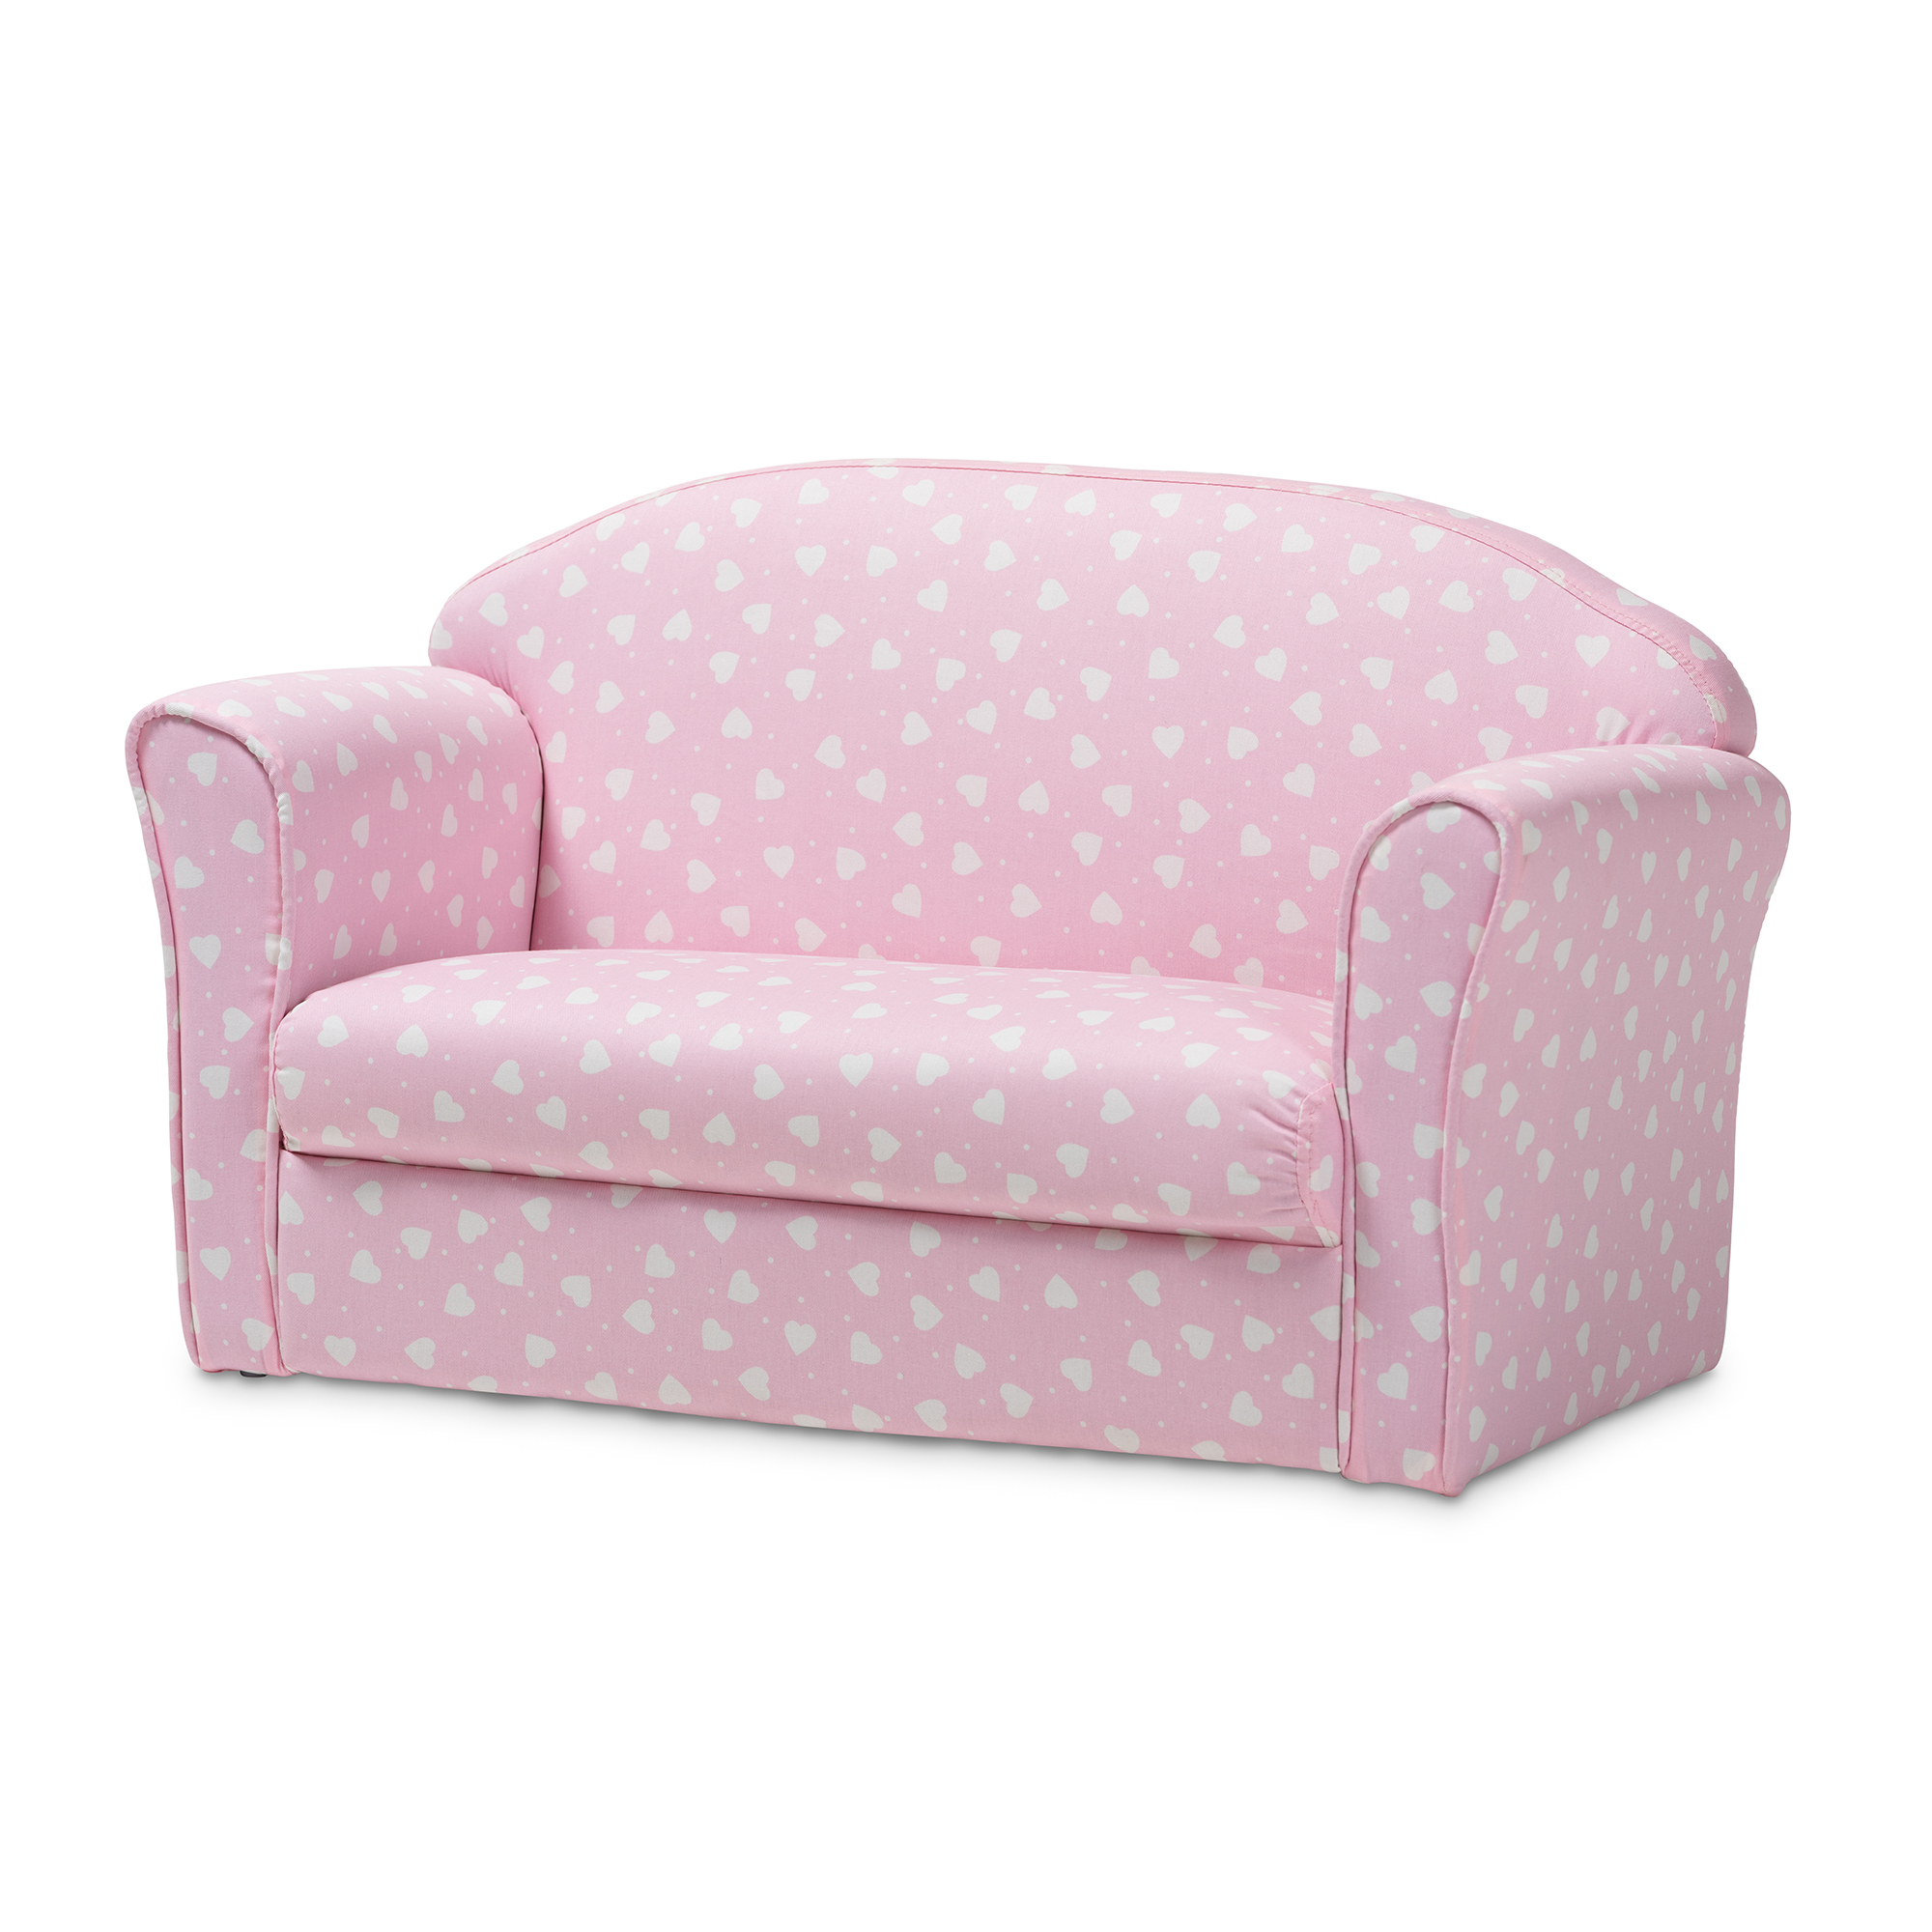 Baxton Studio Erica Modern and Contemporary Pink and White Heart Patterned Fabric Upholstered Kids 2-Seater Sofa